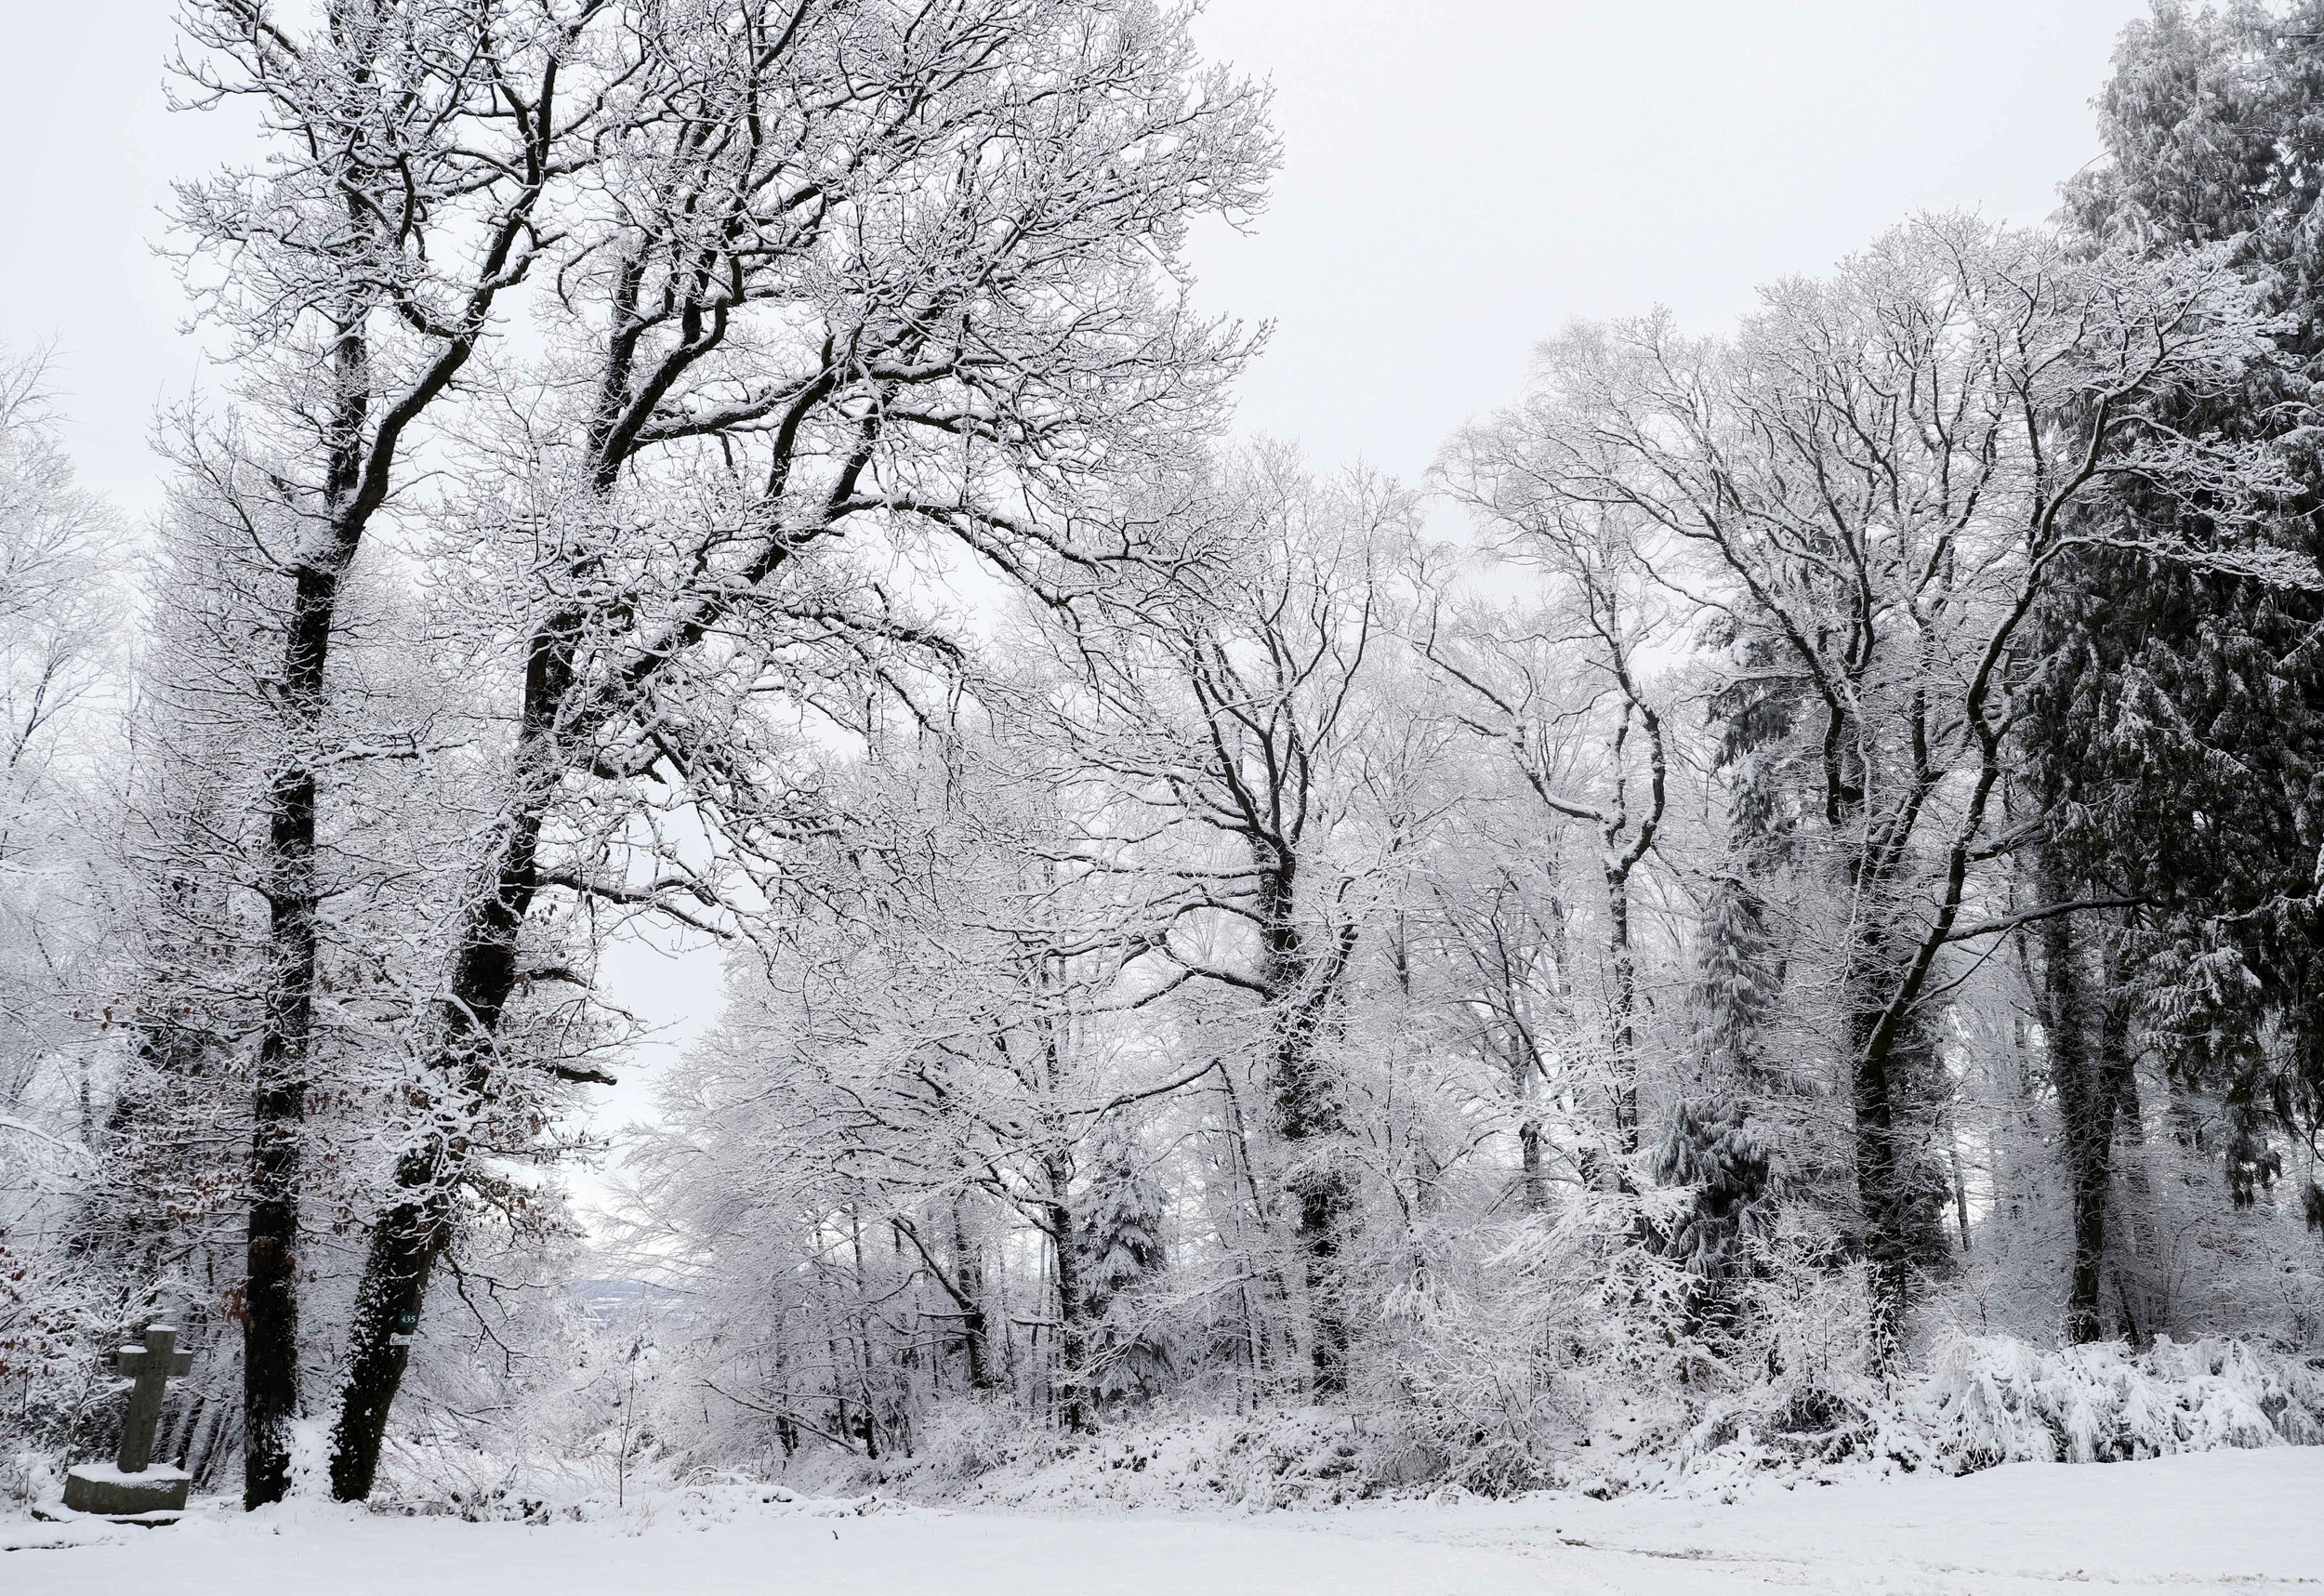 A winter scene of trees covered in snow in a wooded area near Cheateau de Courtomer in Normandy.